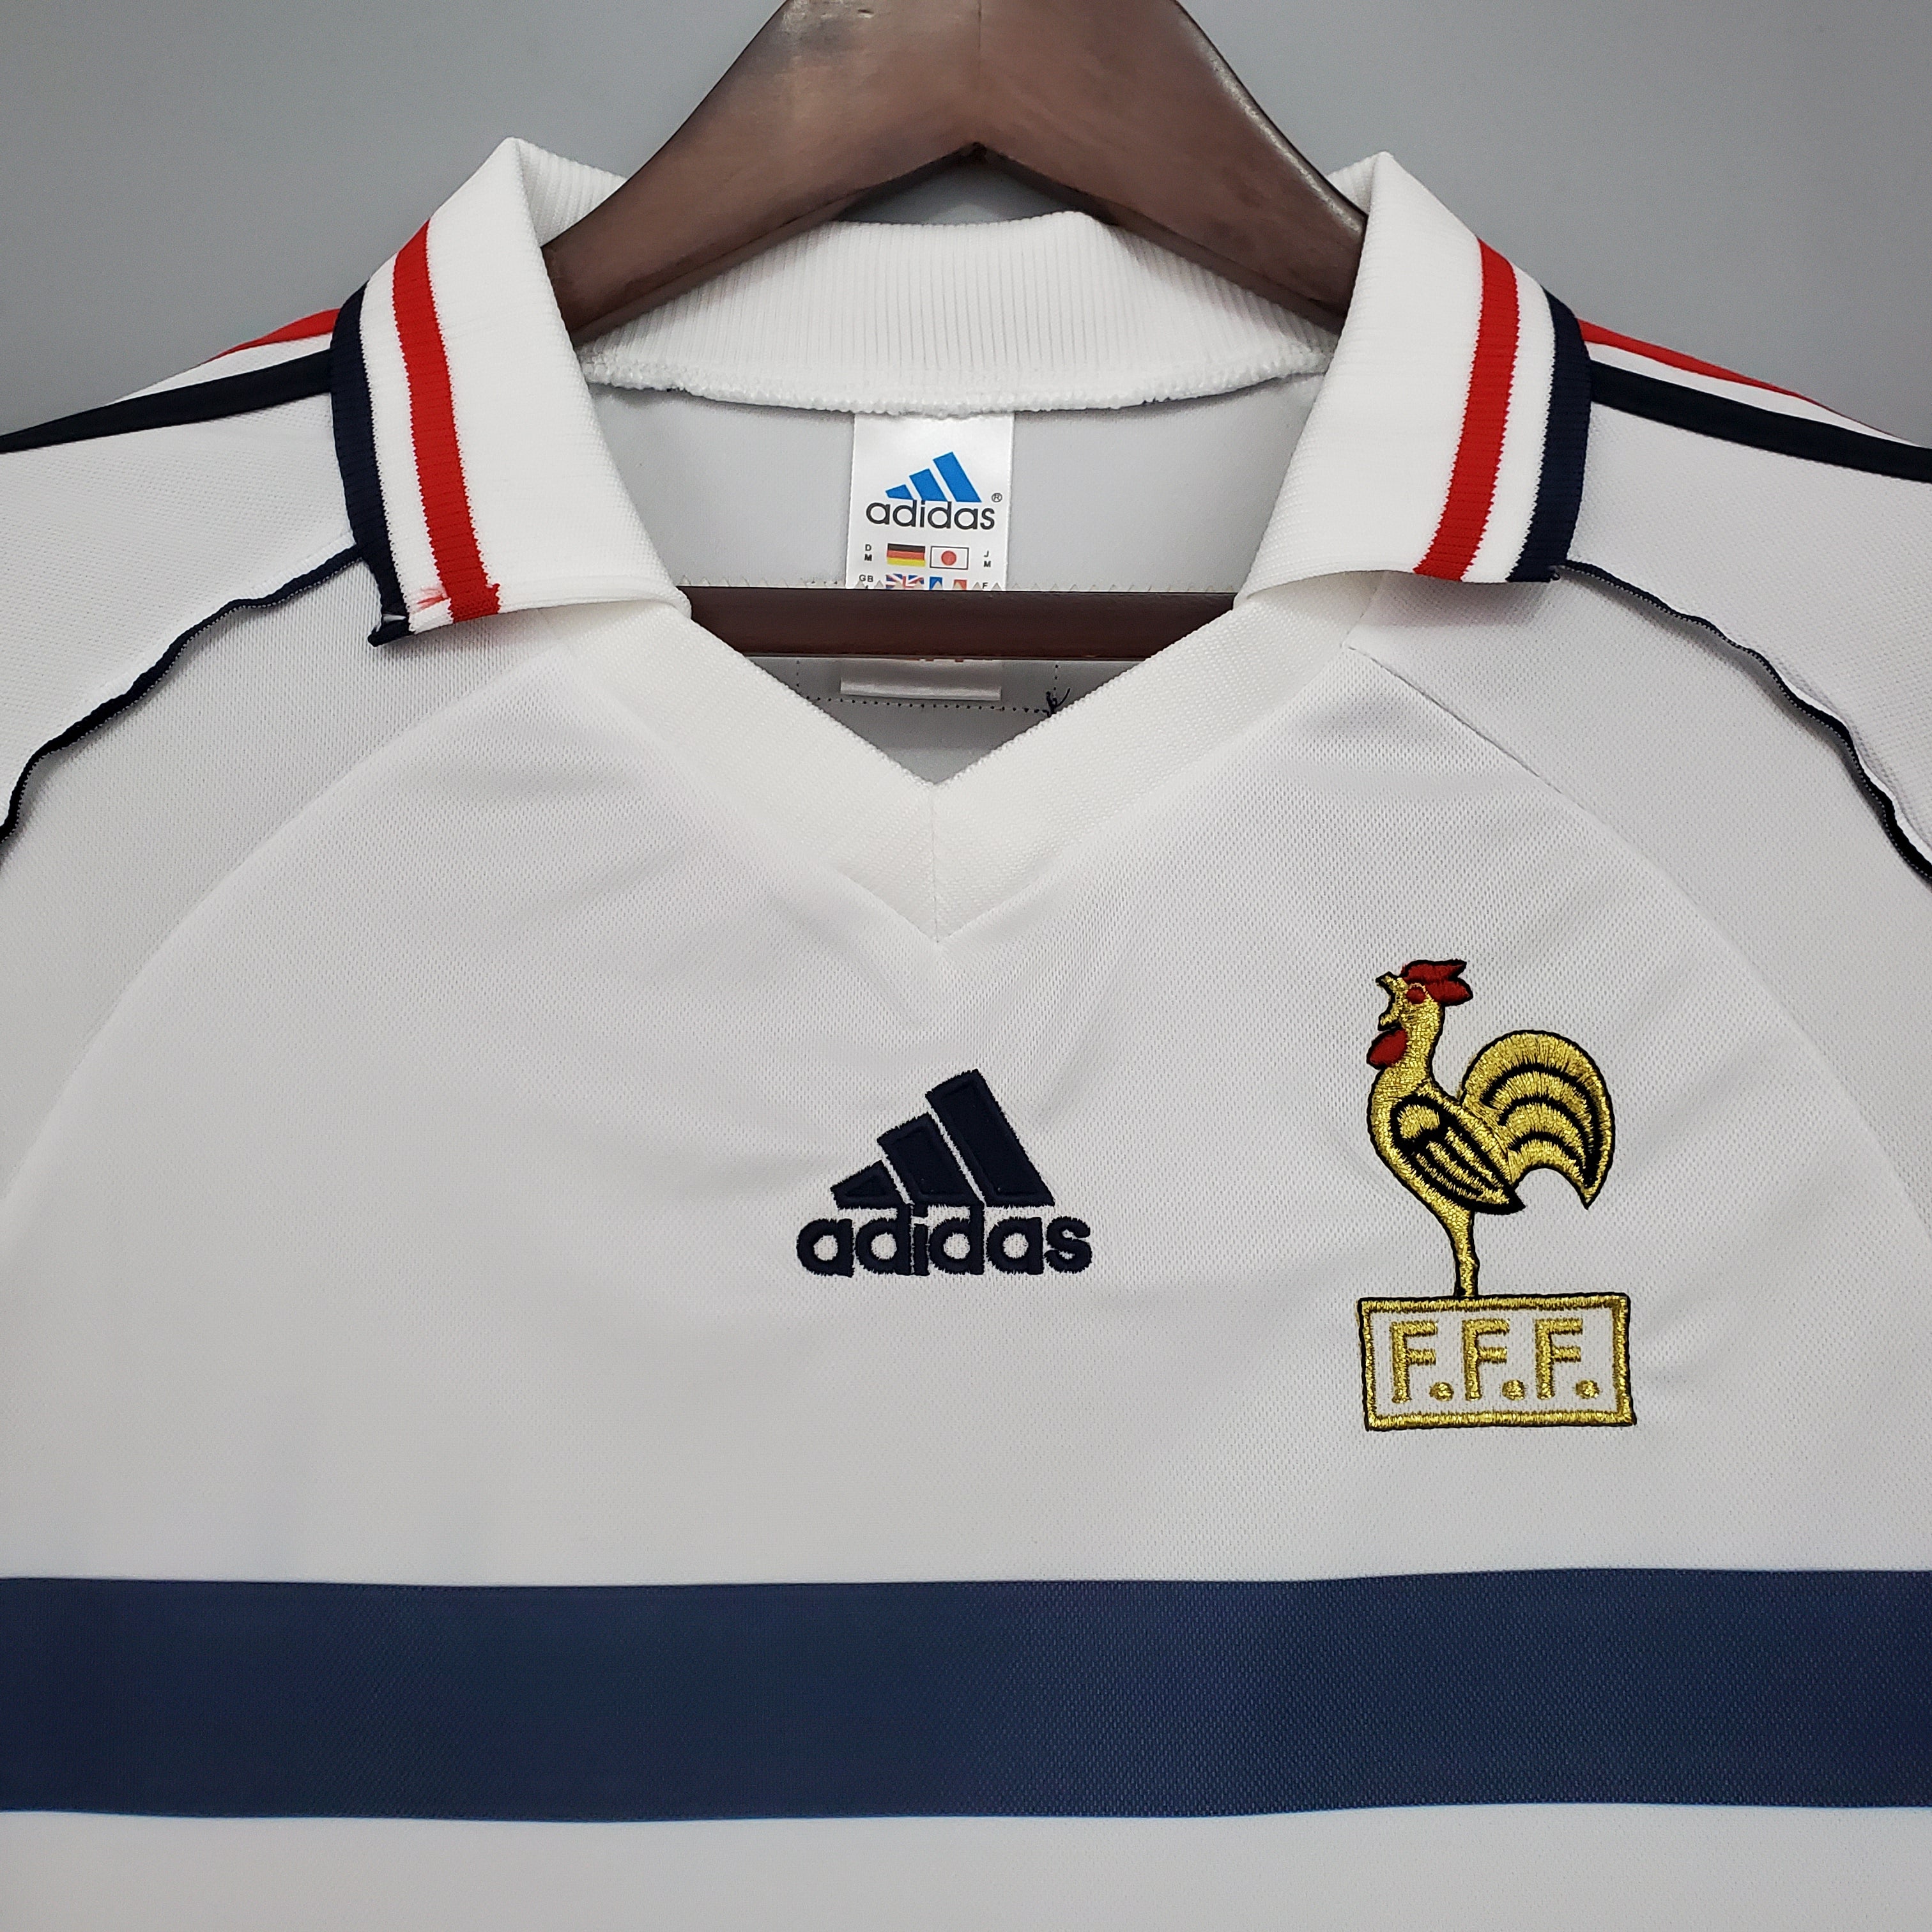 France 1998 World Cup Retro Away Jersey